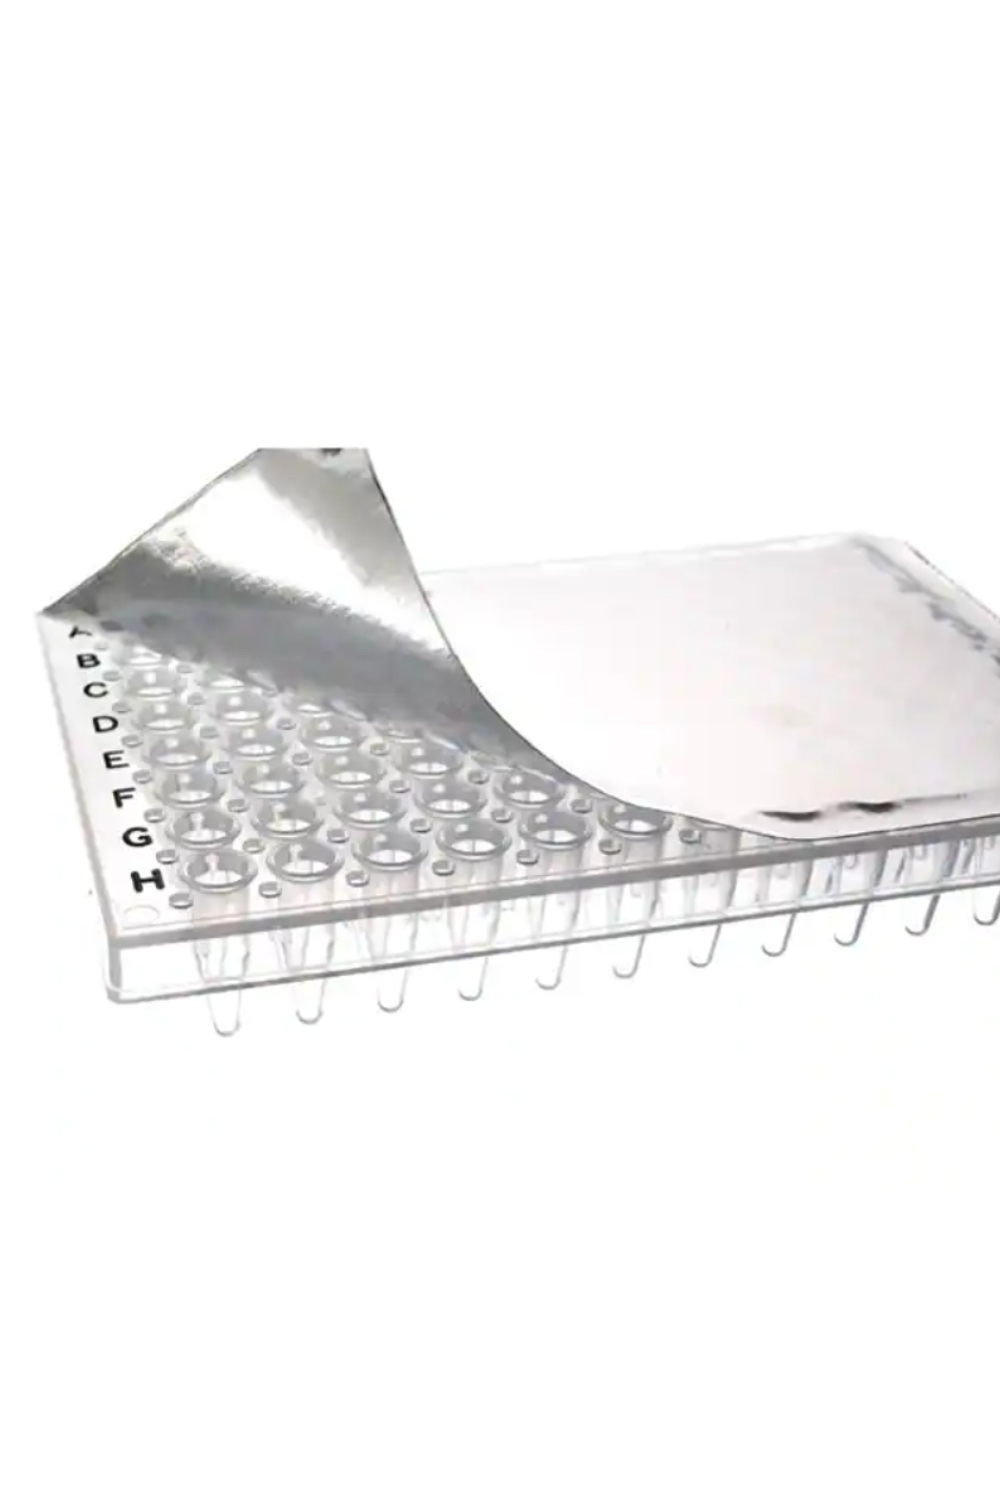 Adhesive PCR Plate Foils. Thermo Scientific. Pack of 100 (AB0626)